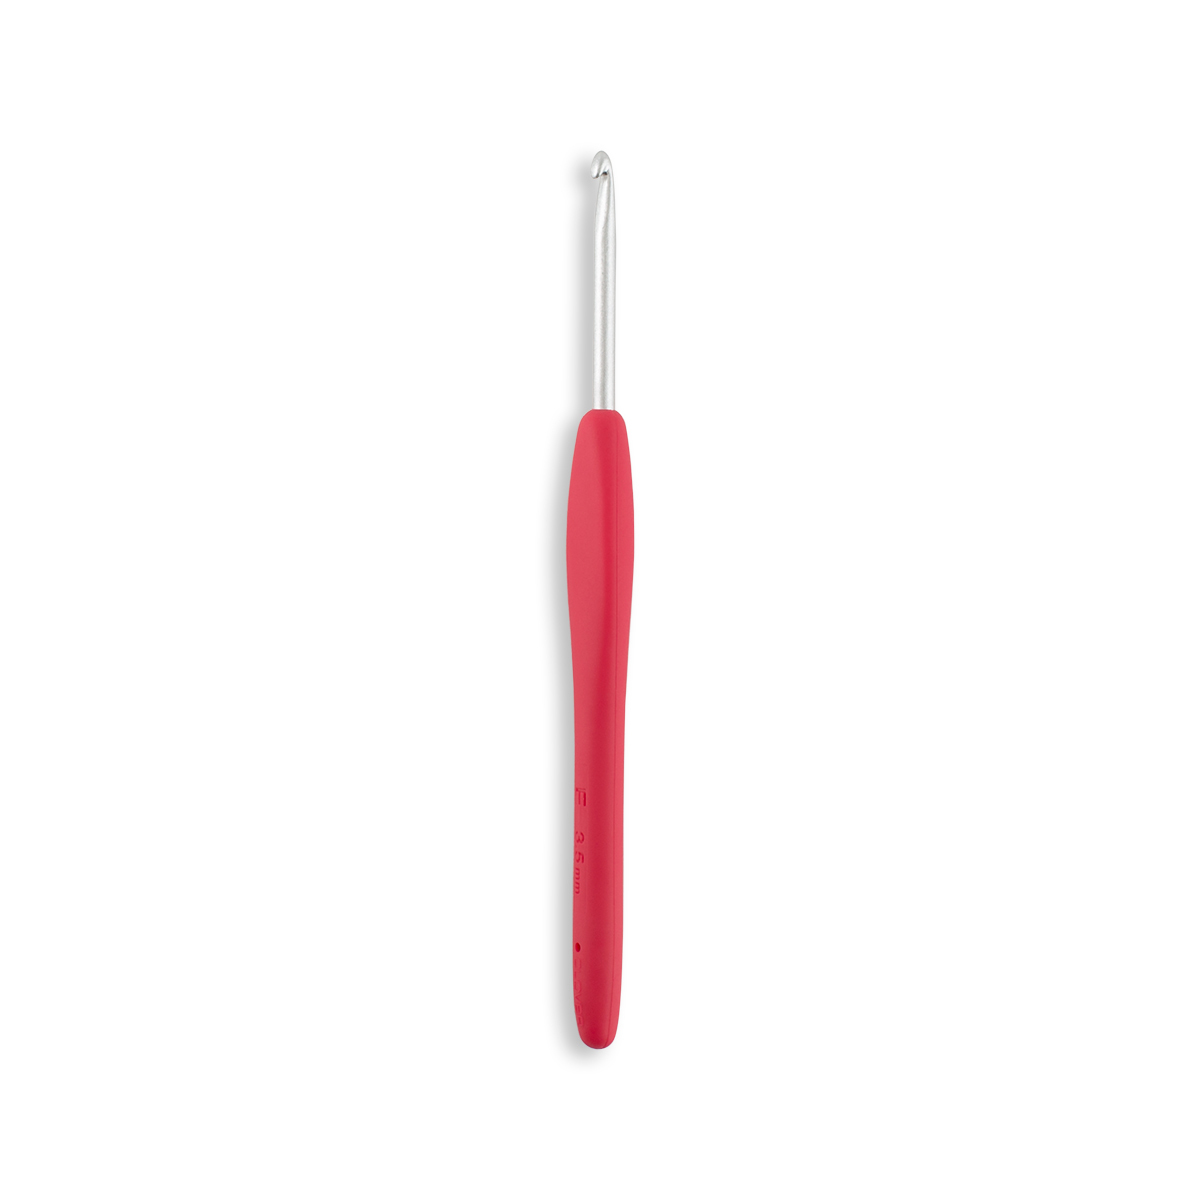 Clover Amour Crochet Hook - Cleaner's Supply